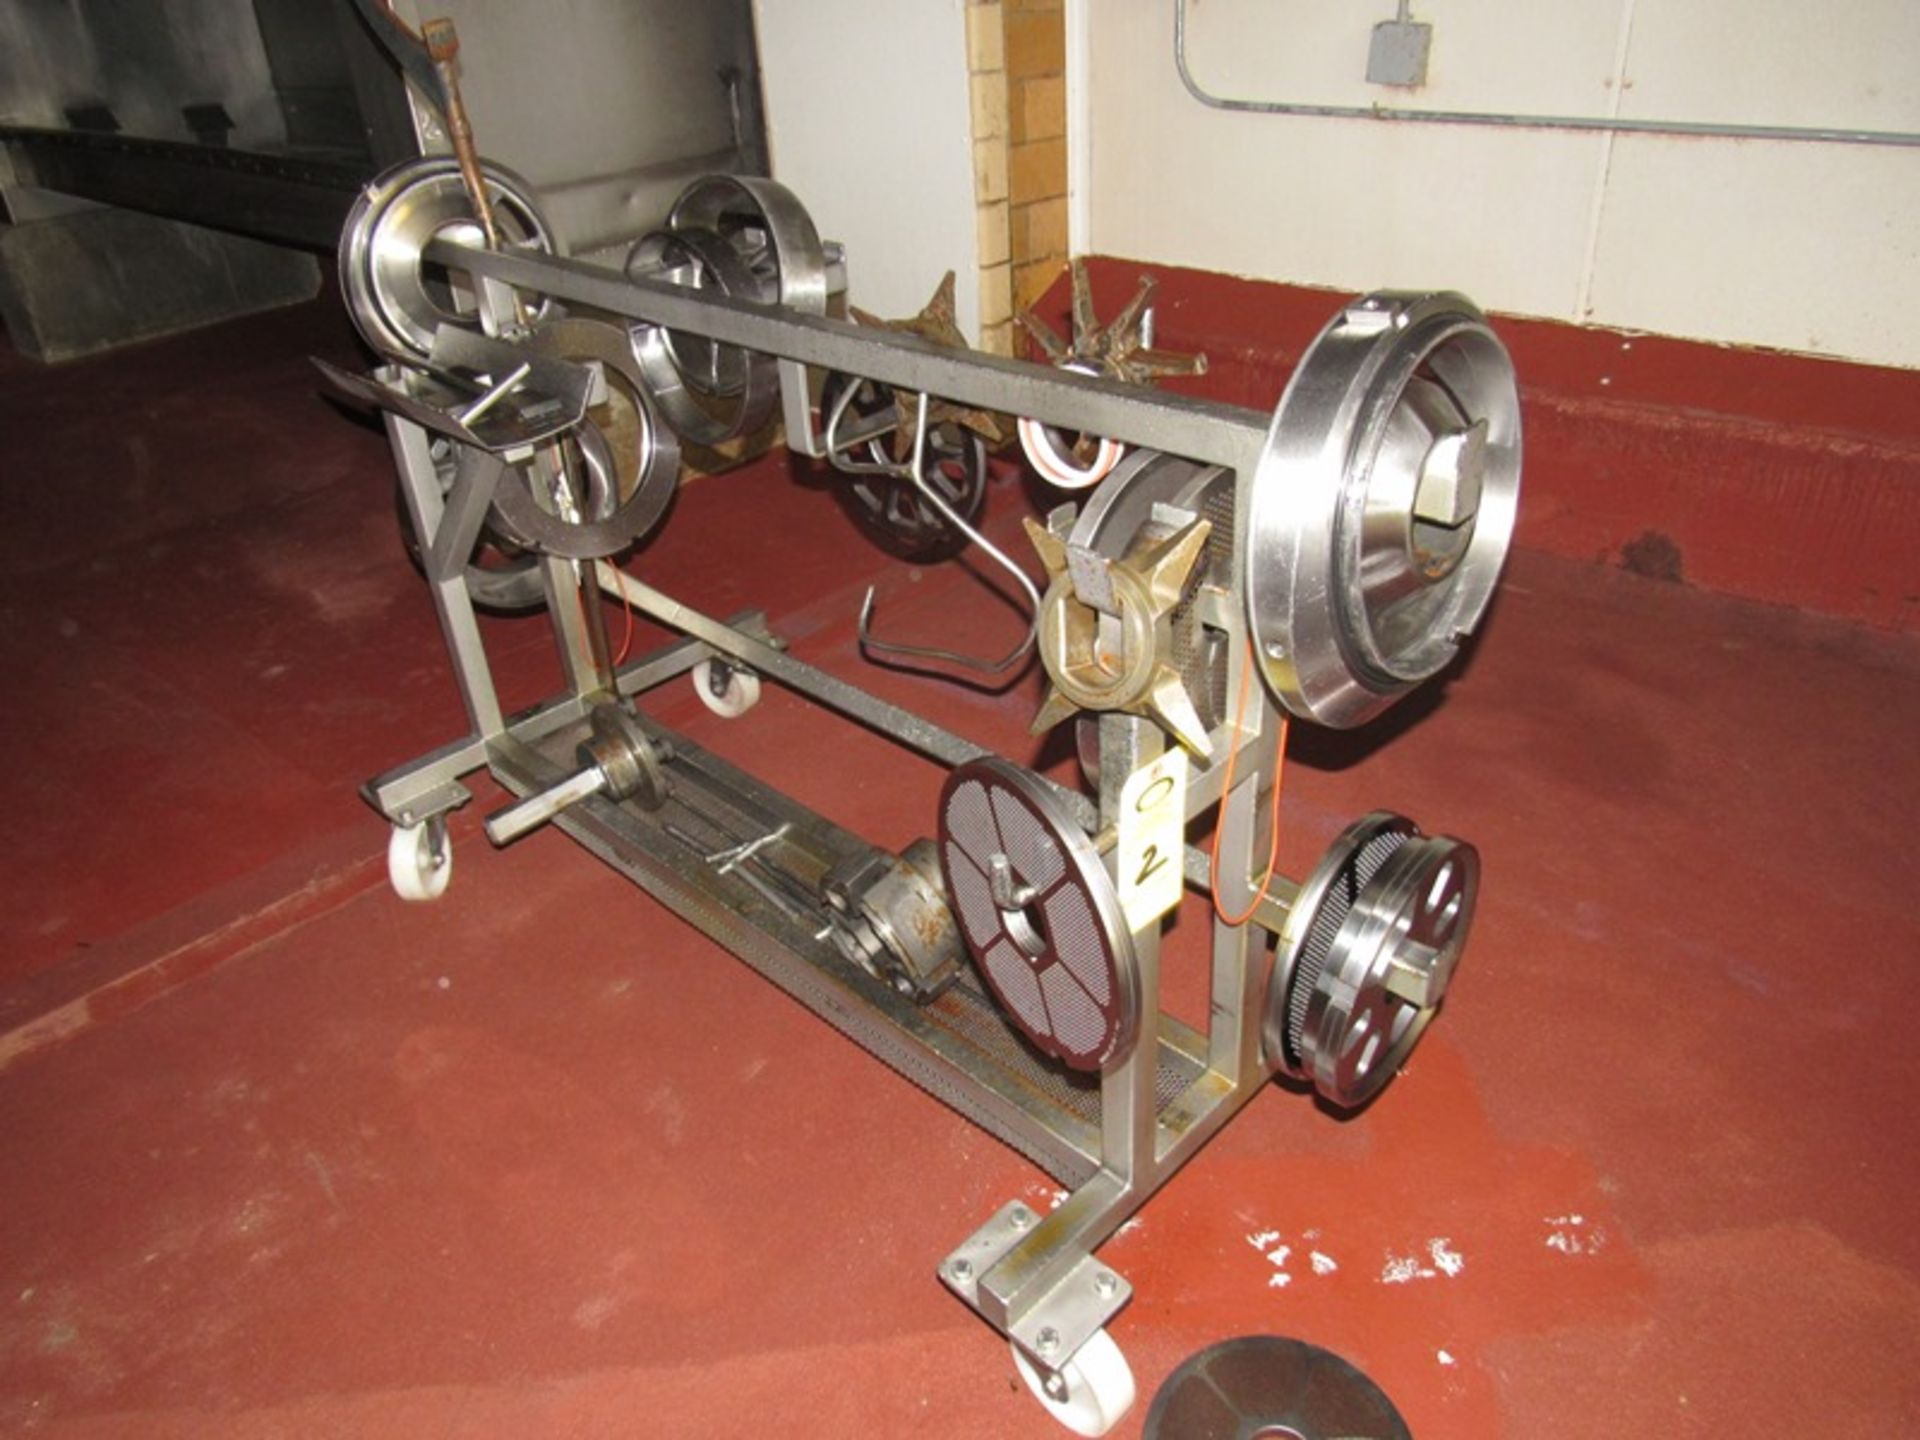 Wolfking Mdl. C-250-UNI Stainless Steel Grinder, Ser. #M-80477, Mfg. 1995, stainless steel auger, - Image 8 of 10